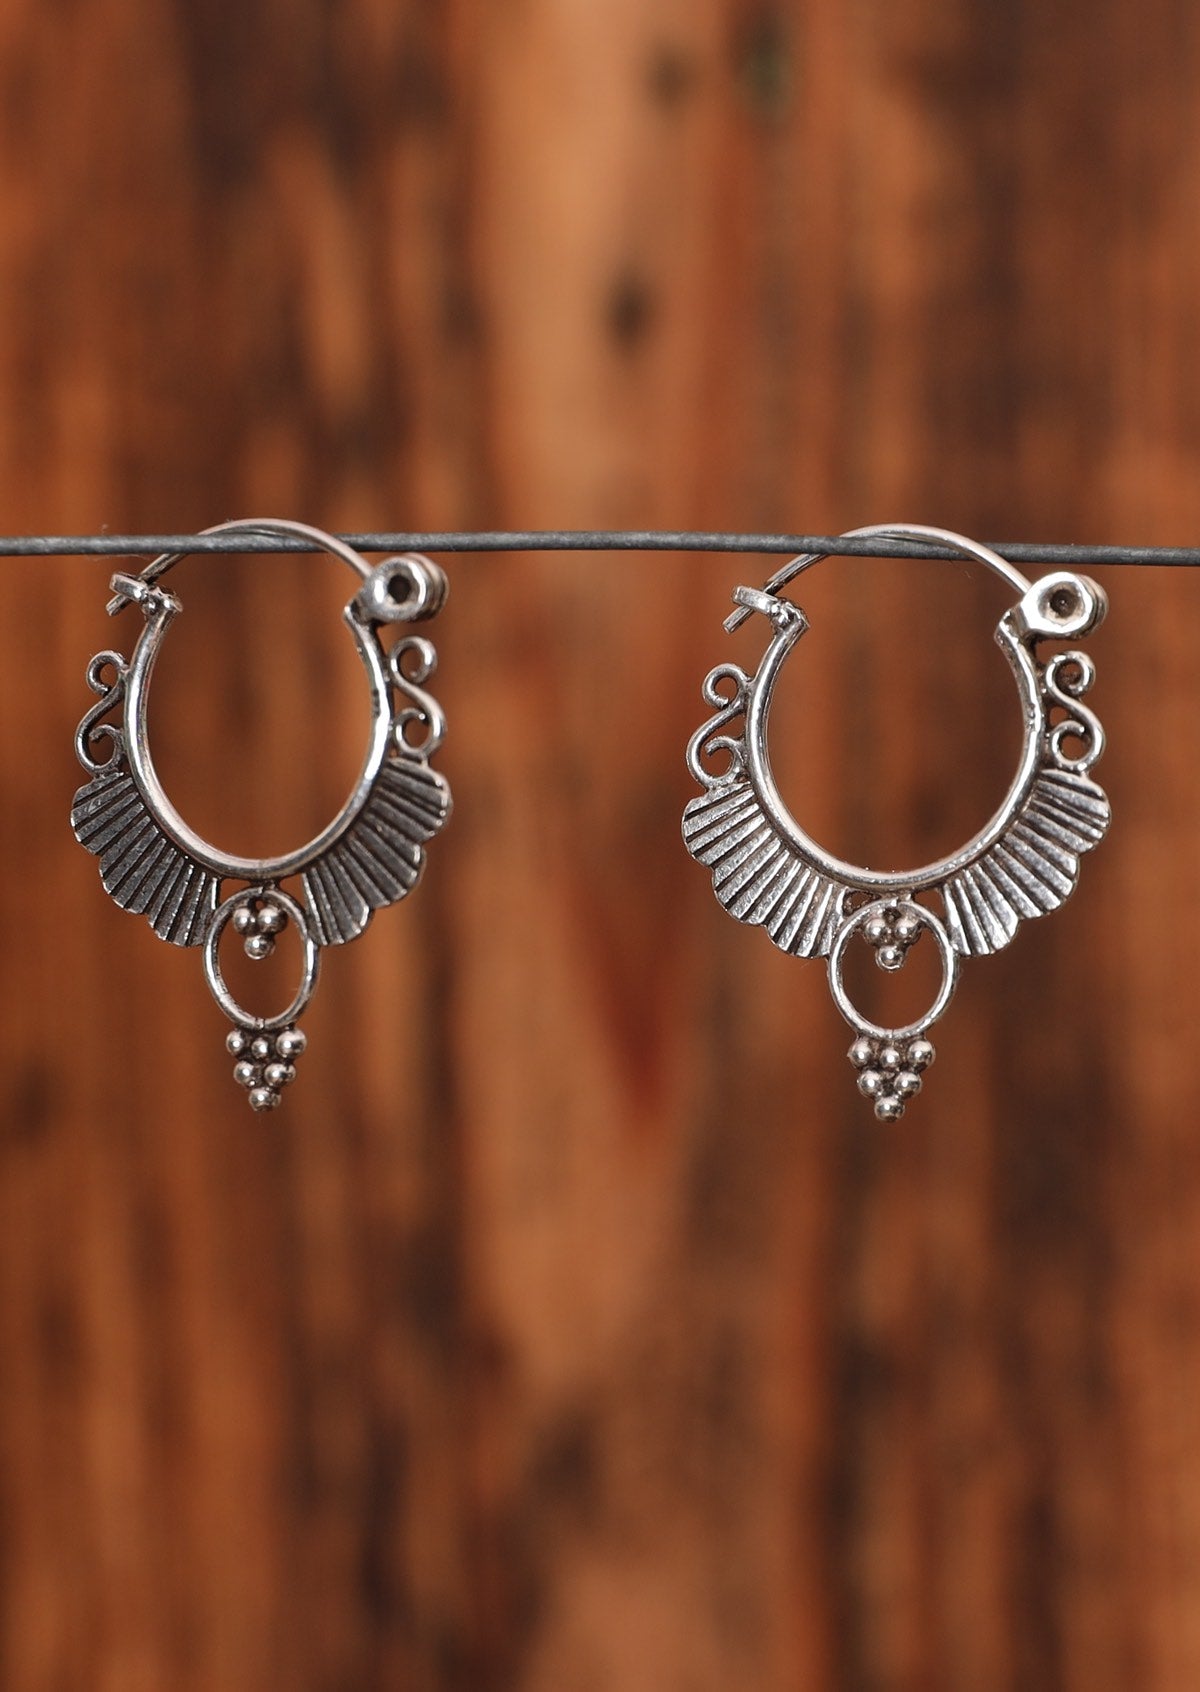 92.5% silver circular ornate earrings hanging on a wire for display.